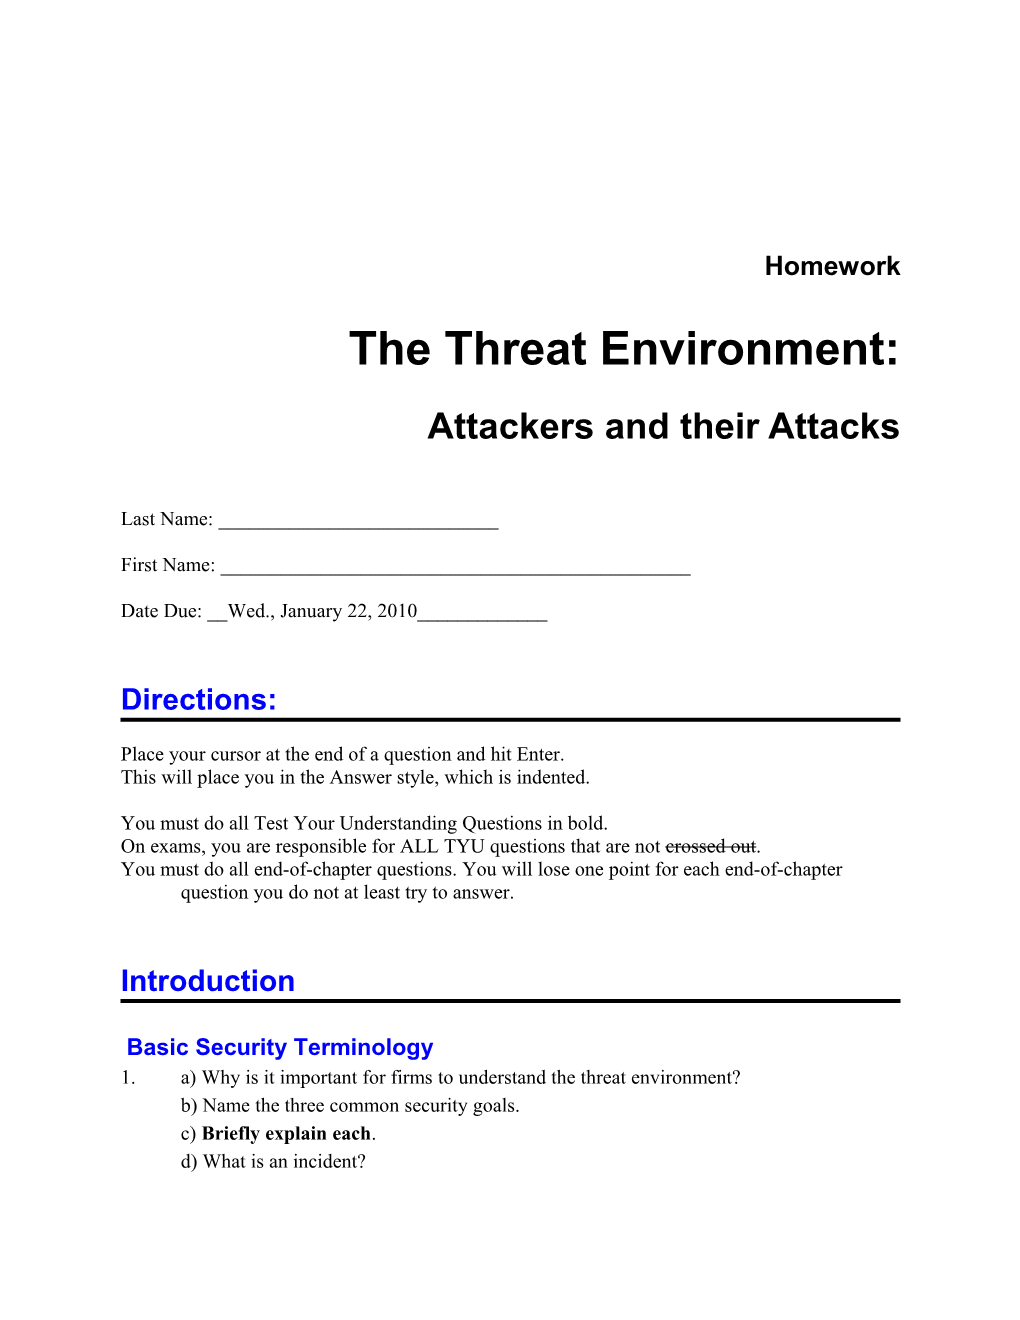 Chapter 1: the Threat Environment